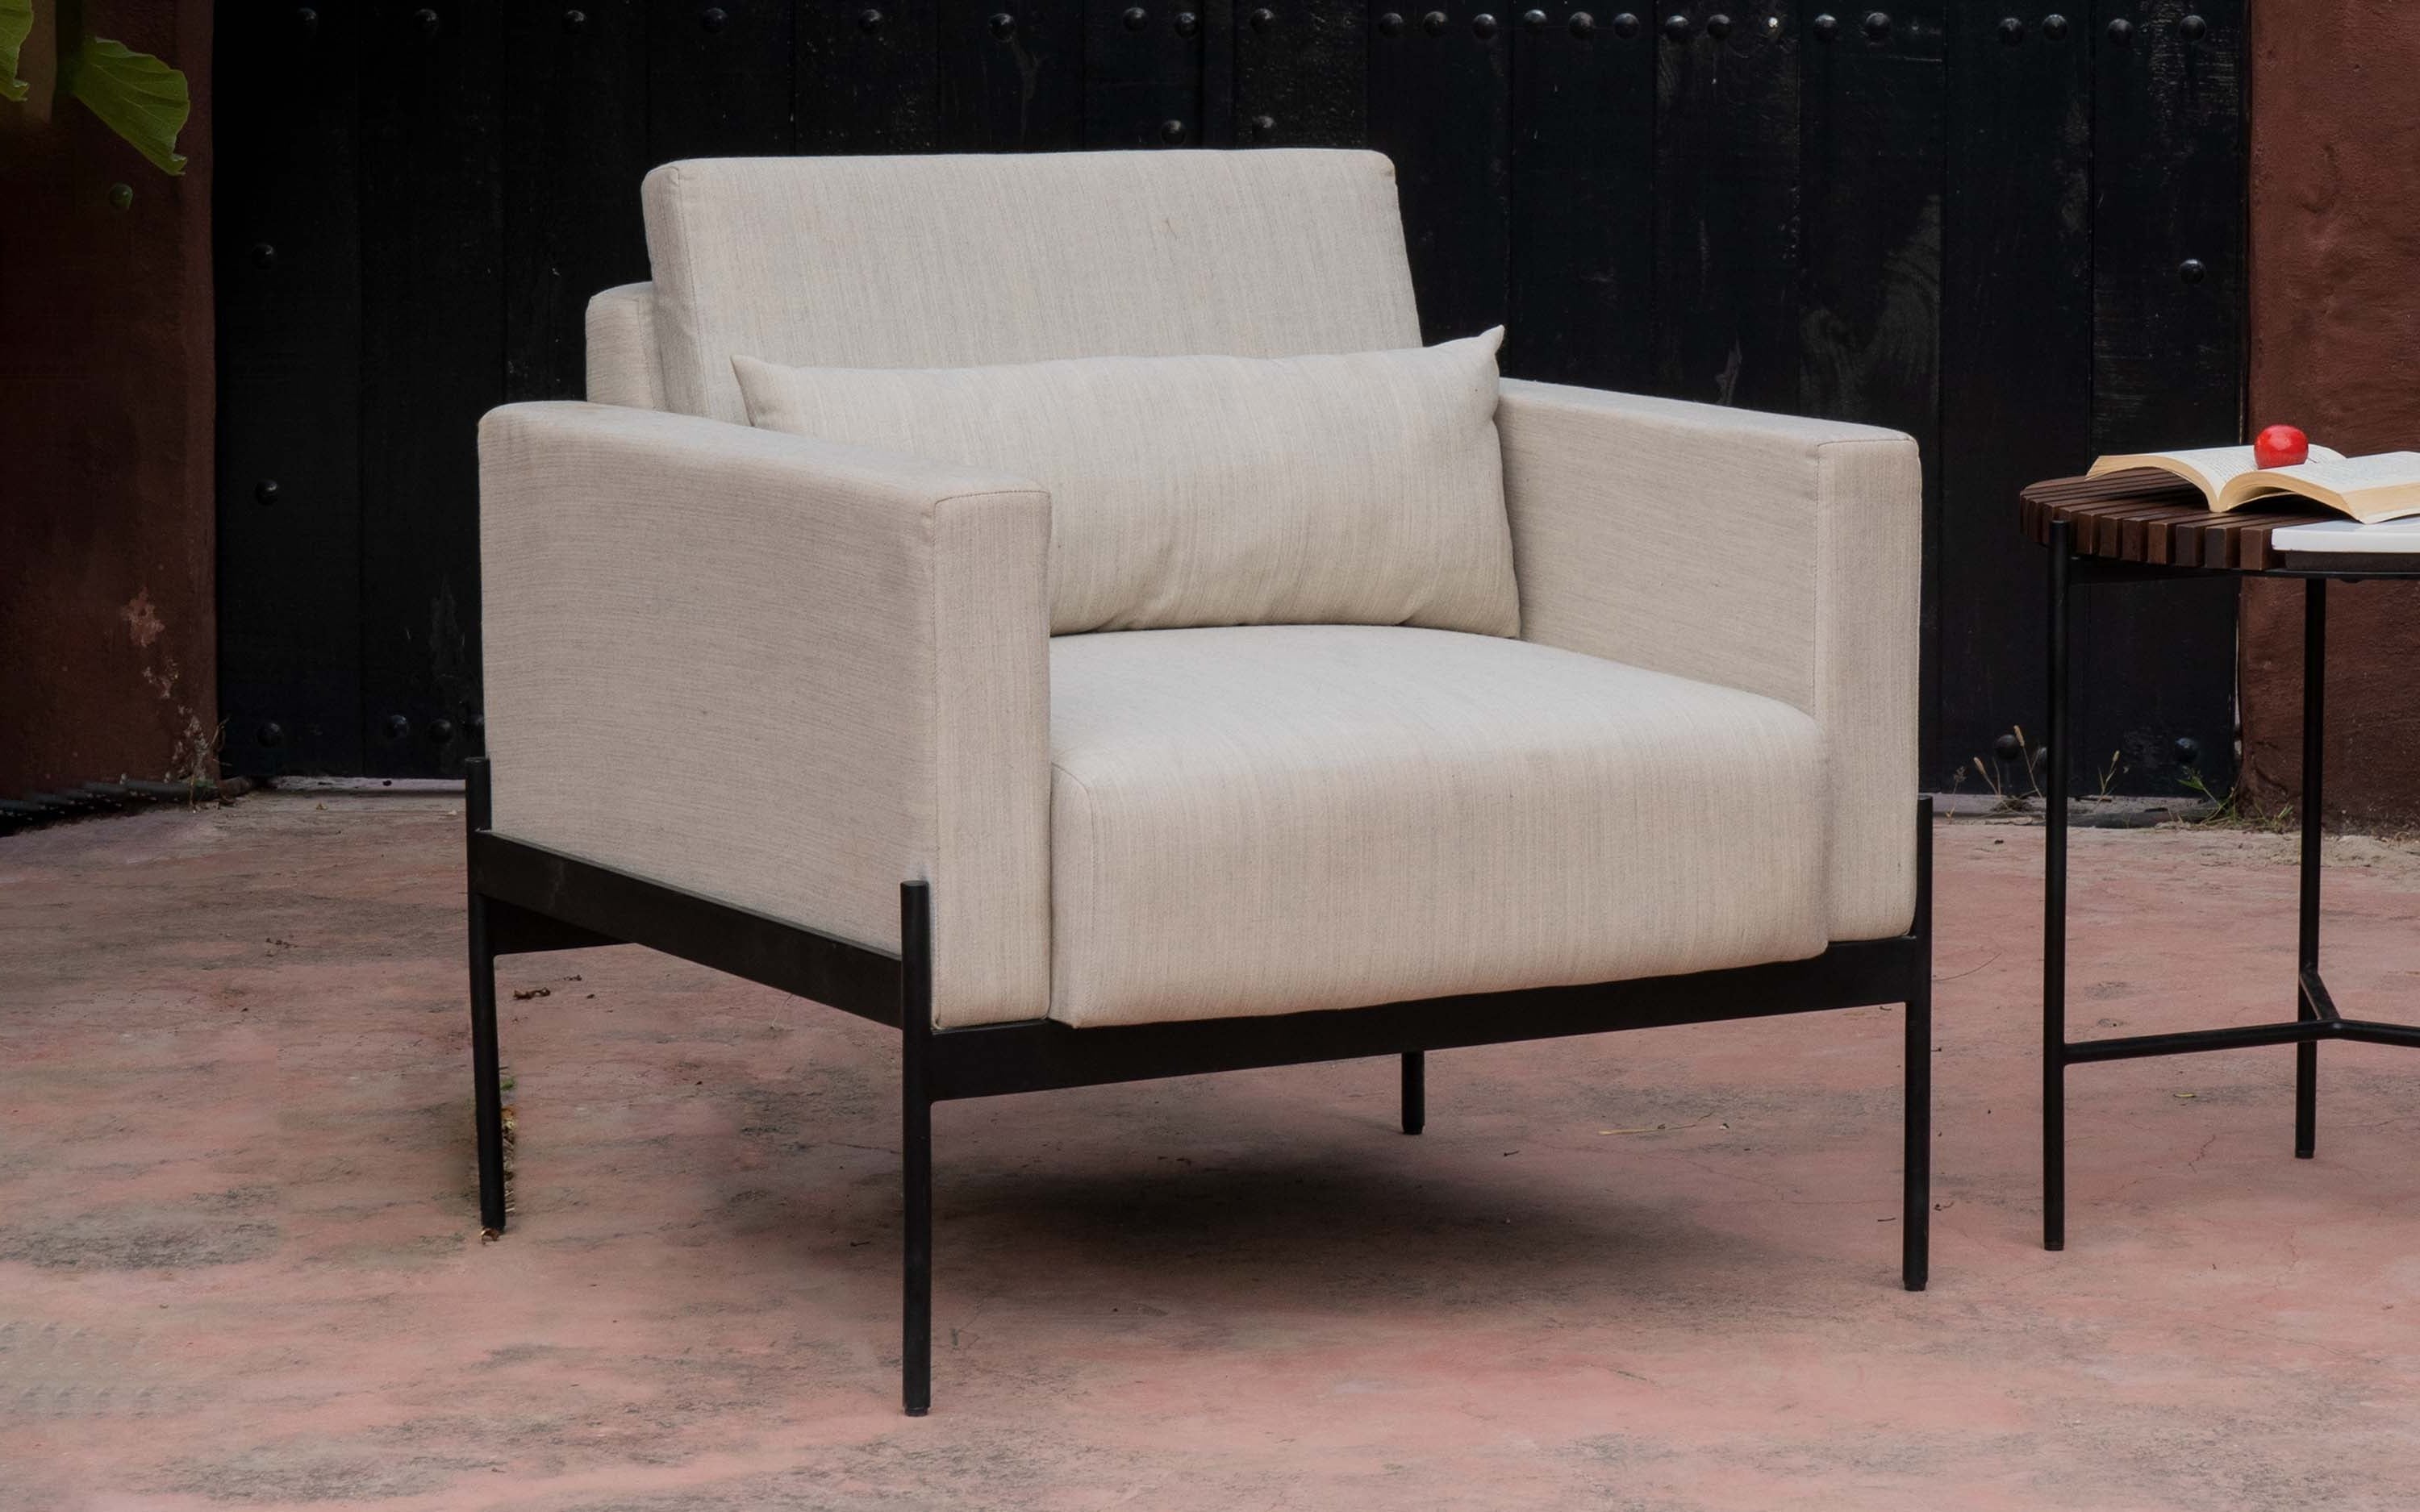 Covent Garden Outdoor Sofa.  Unveil the ease of Stain-Free Furniture: Marvels that repel spills!